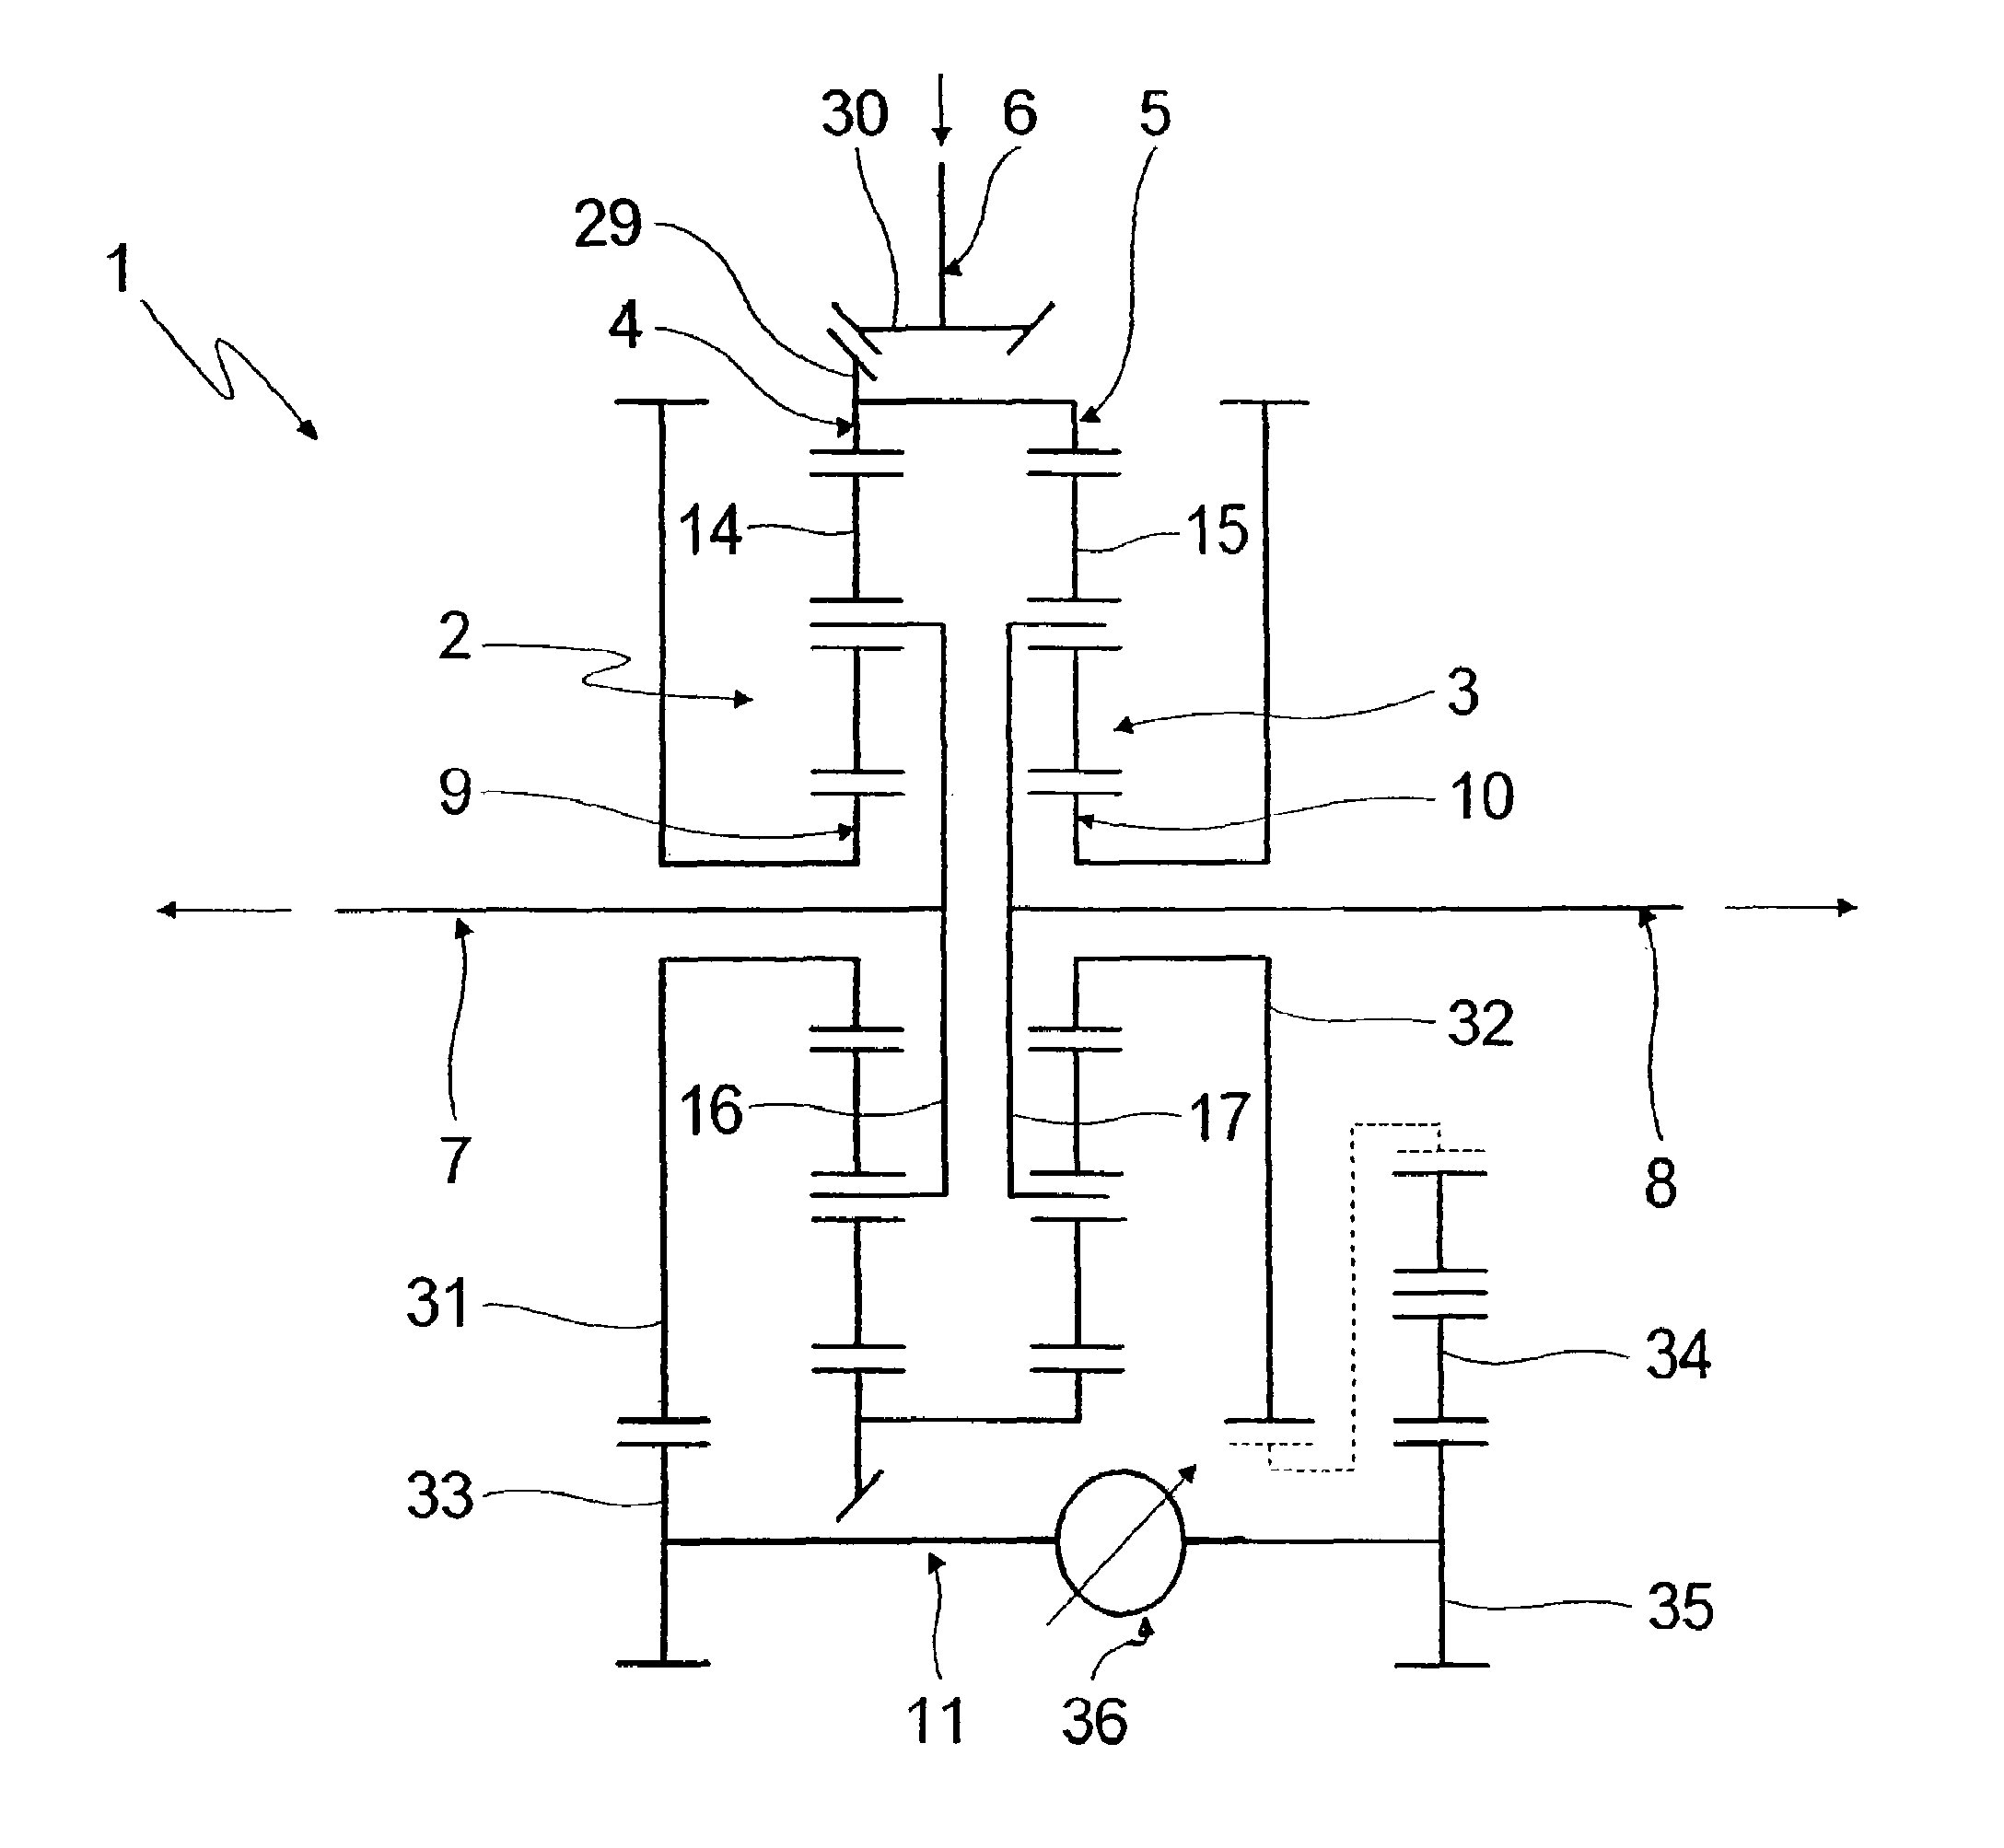 Transmission and drive train for a vehicle